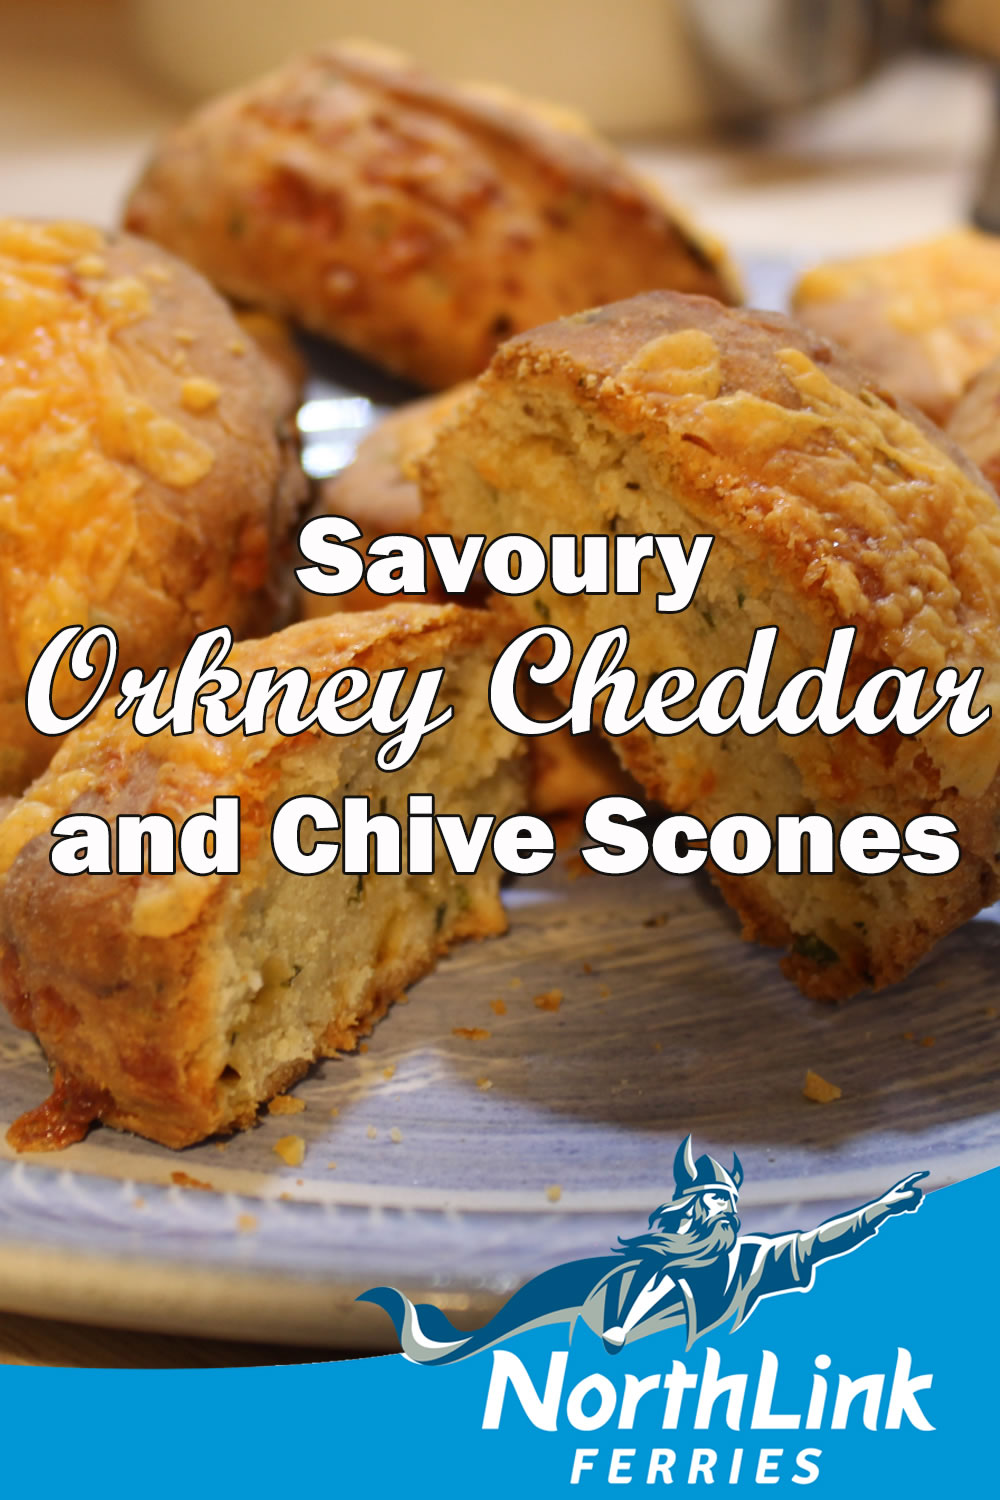 Savoury Orkney Cheddar and Chive Scones